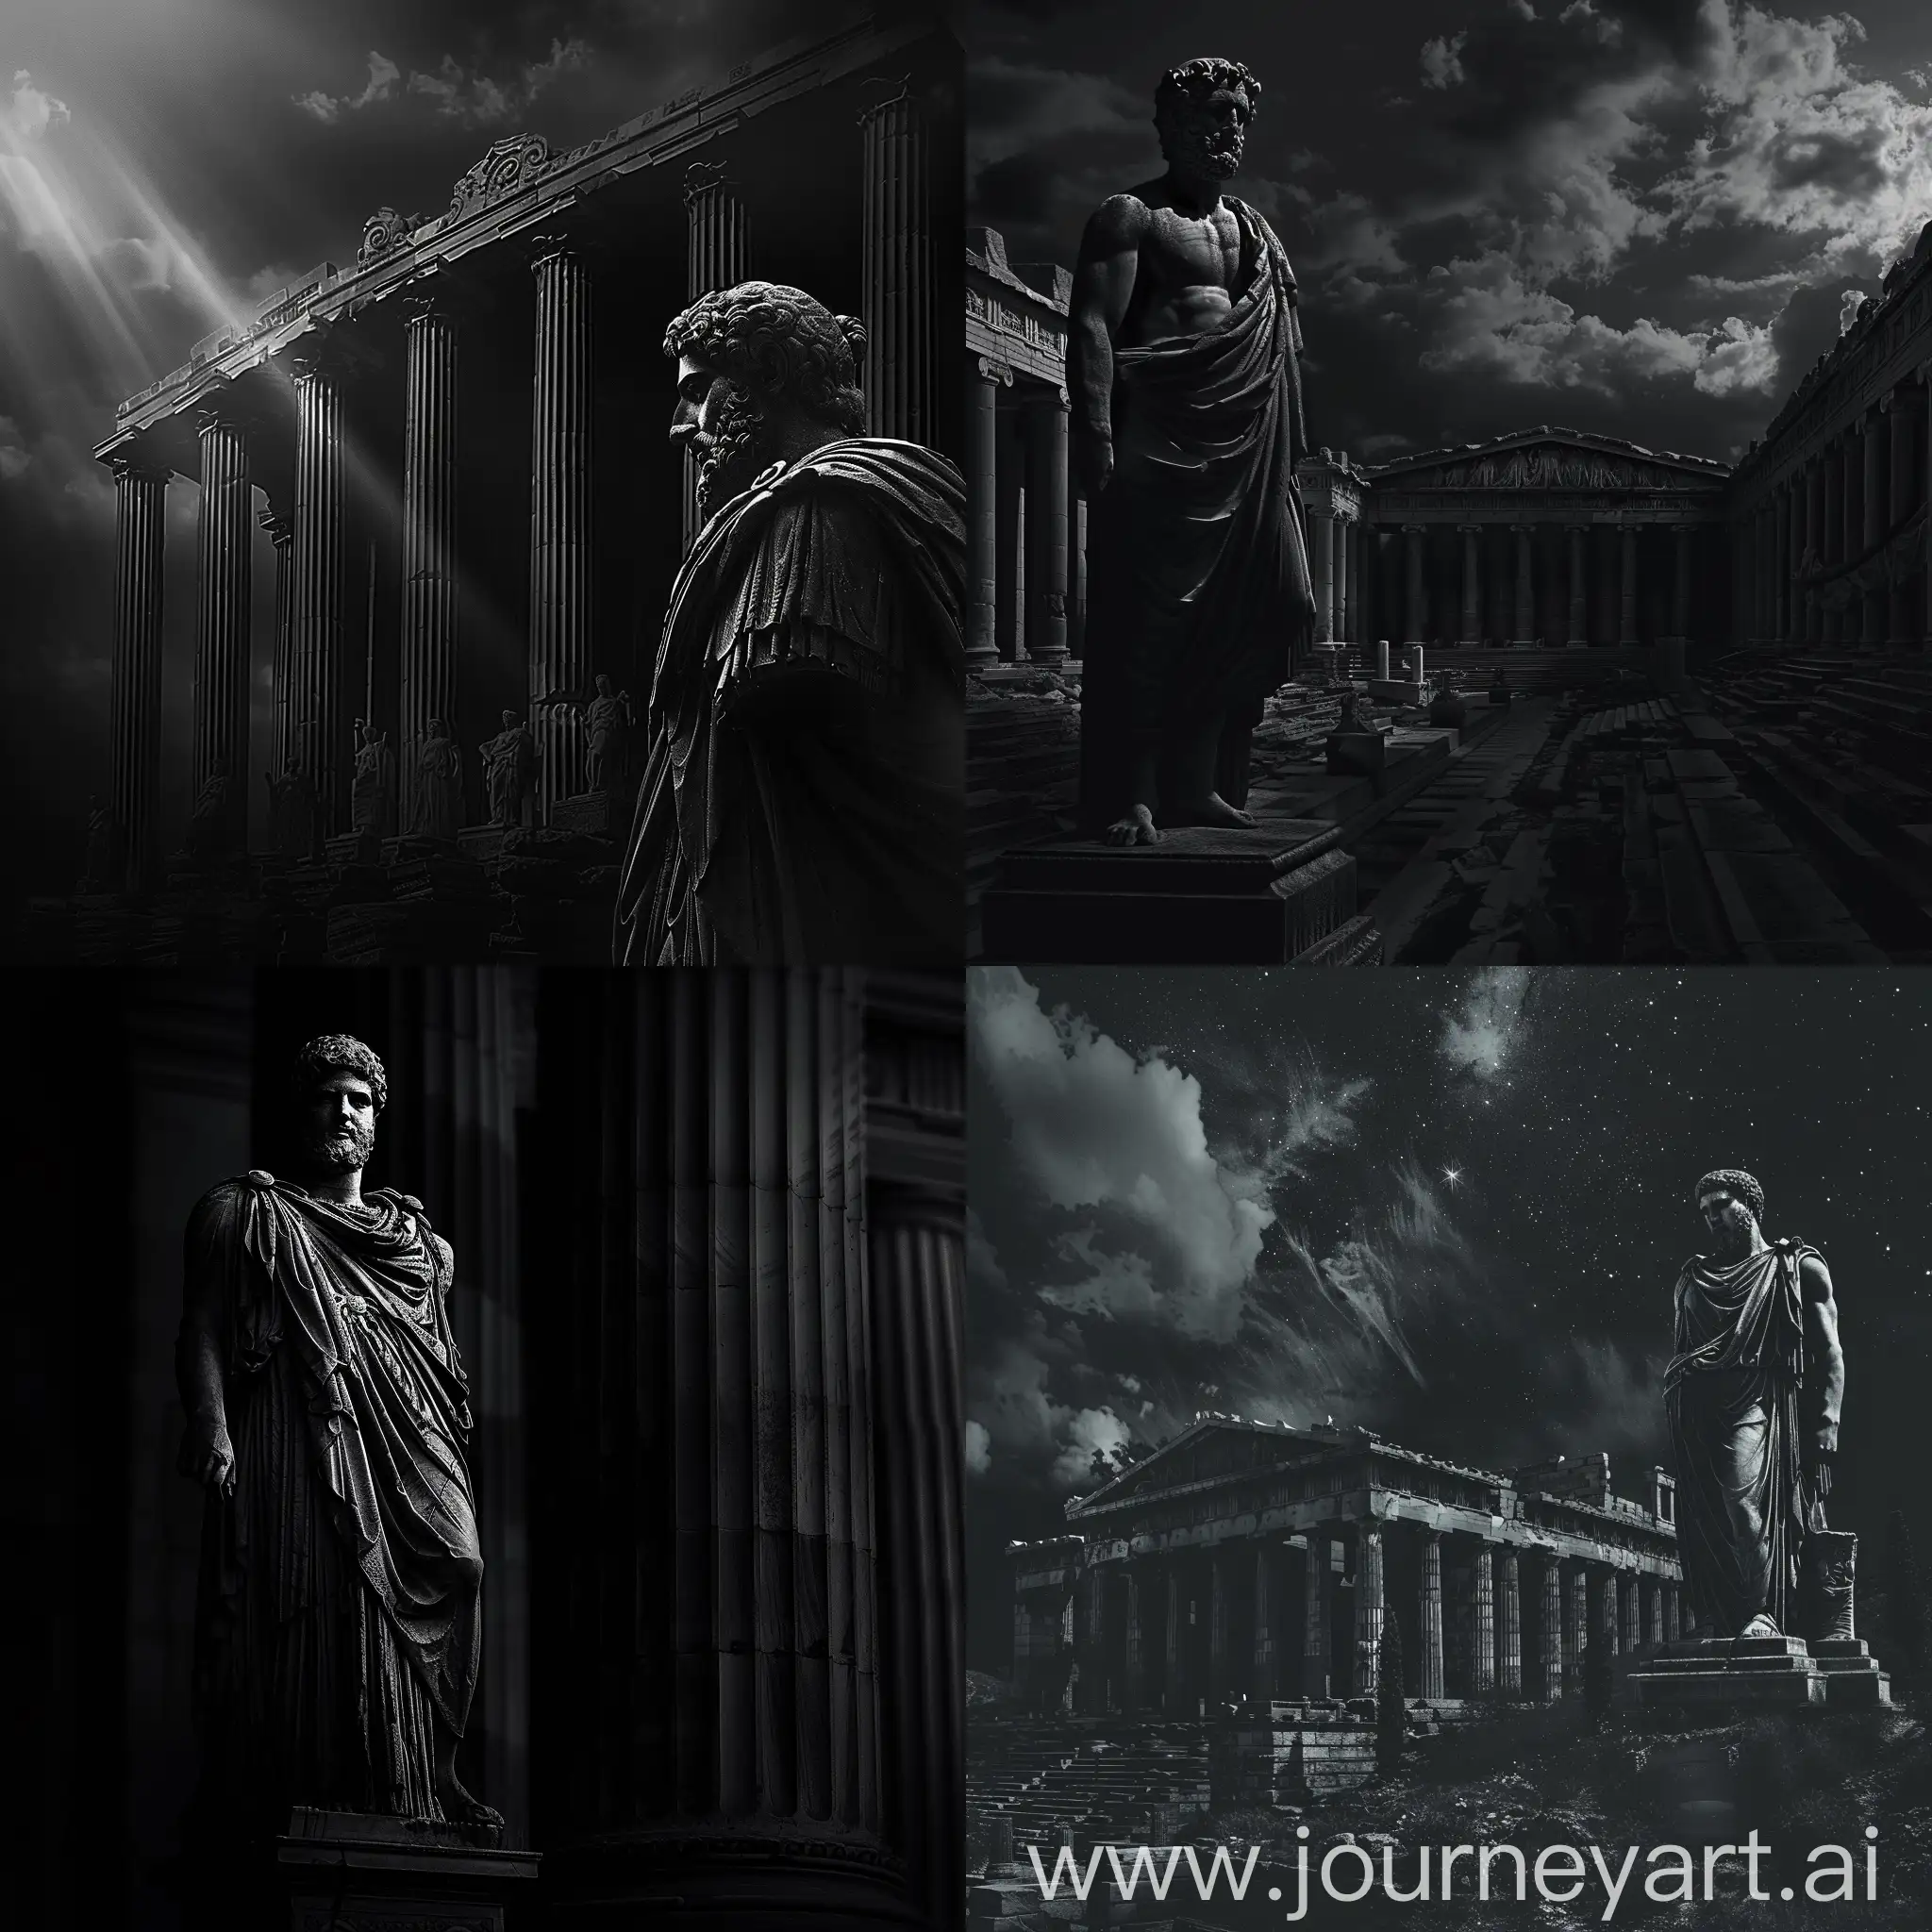 "A dark landscape image of an ancient greek society deeply connected to stoicism, black and white, ancient greek architecture, include one single big statue of a stereotypical strong greek man, marcus aurelius
